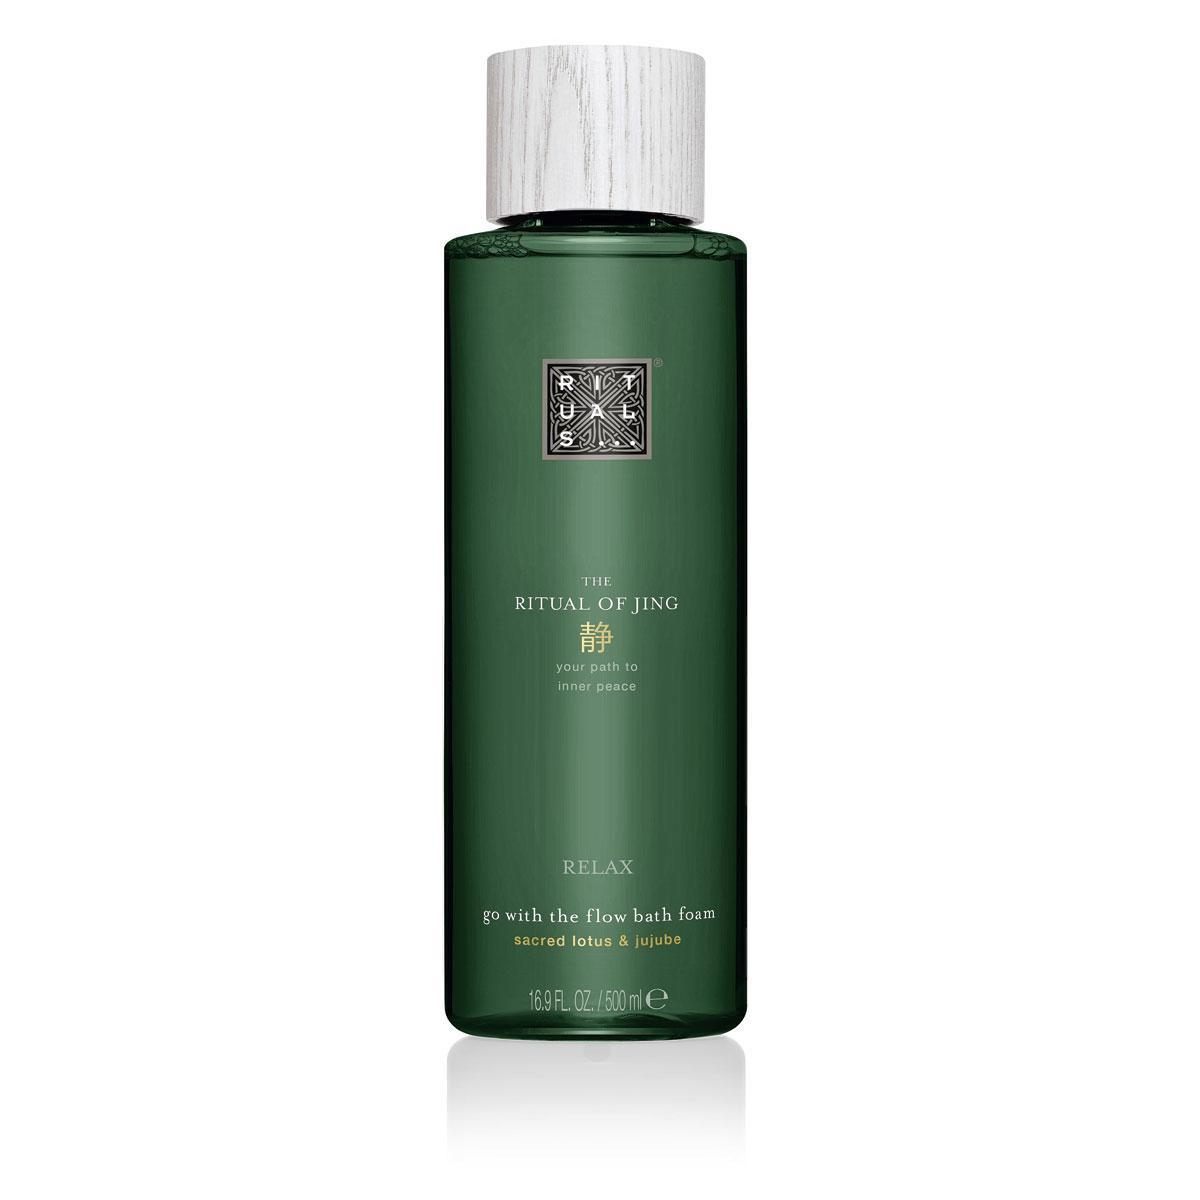 S'offrir des soins doudous: Bain moussant Go With the Flow, Relax - The Ritual of Jing, Rituals, 13,90 euros les 500 ml.